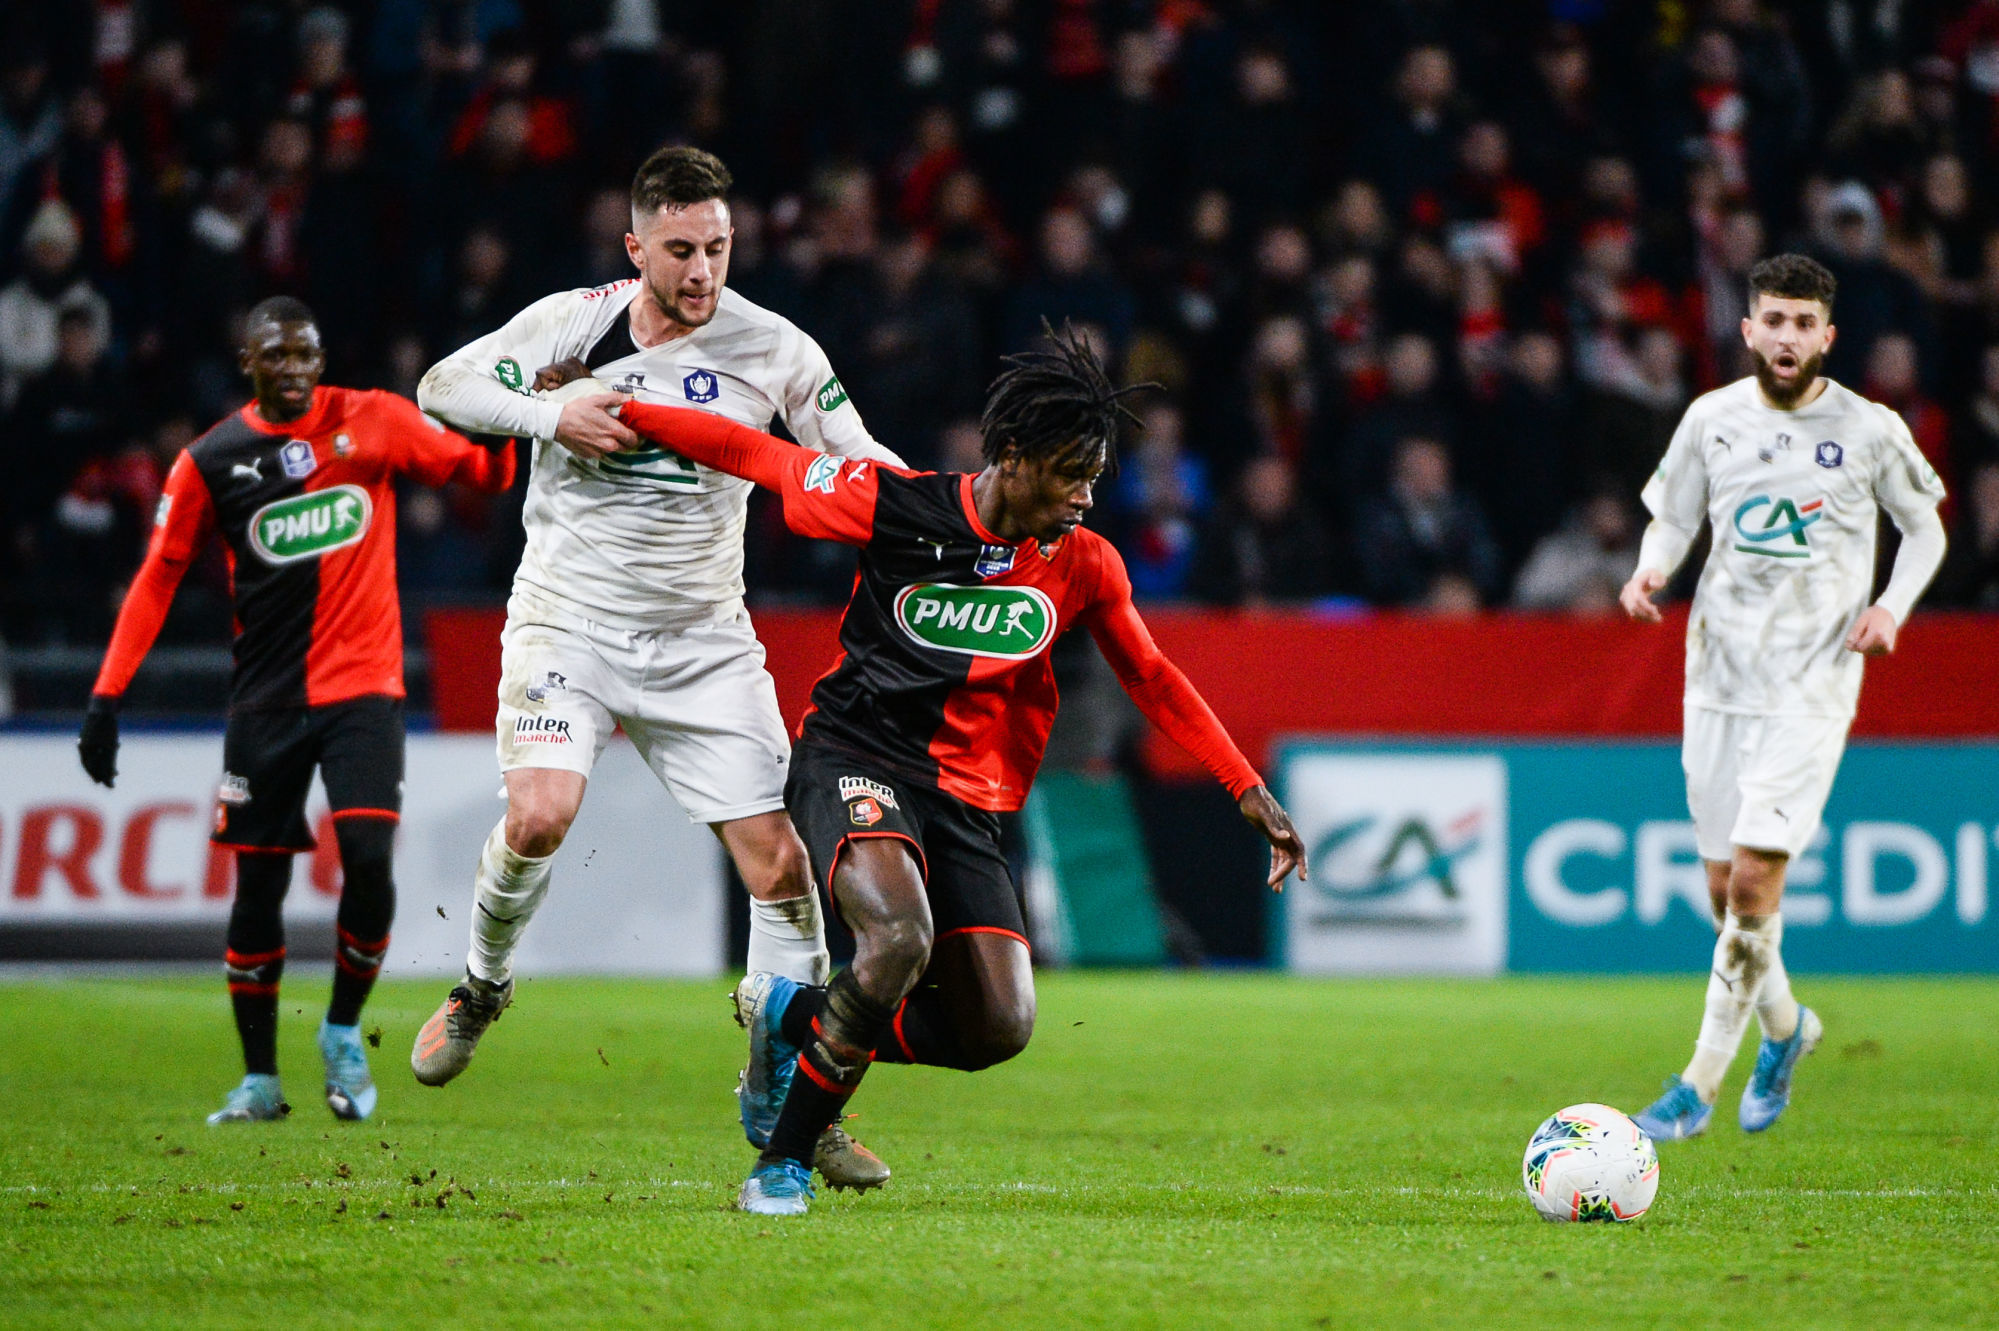 Quentin CORNETTE of Amiens and Eduardo CAMAVINGA of Rennes during the French Cup soccer match between Rennes and Amiens on January 4, 2020 in Rennes, France. (Photo by Baptiste Fernandez/Icon Sport) - Roazhon Park - Rennes (France)